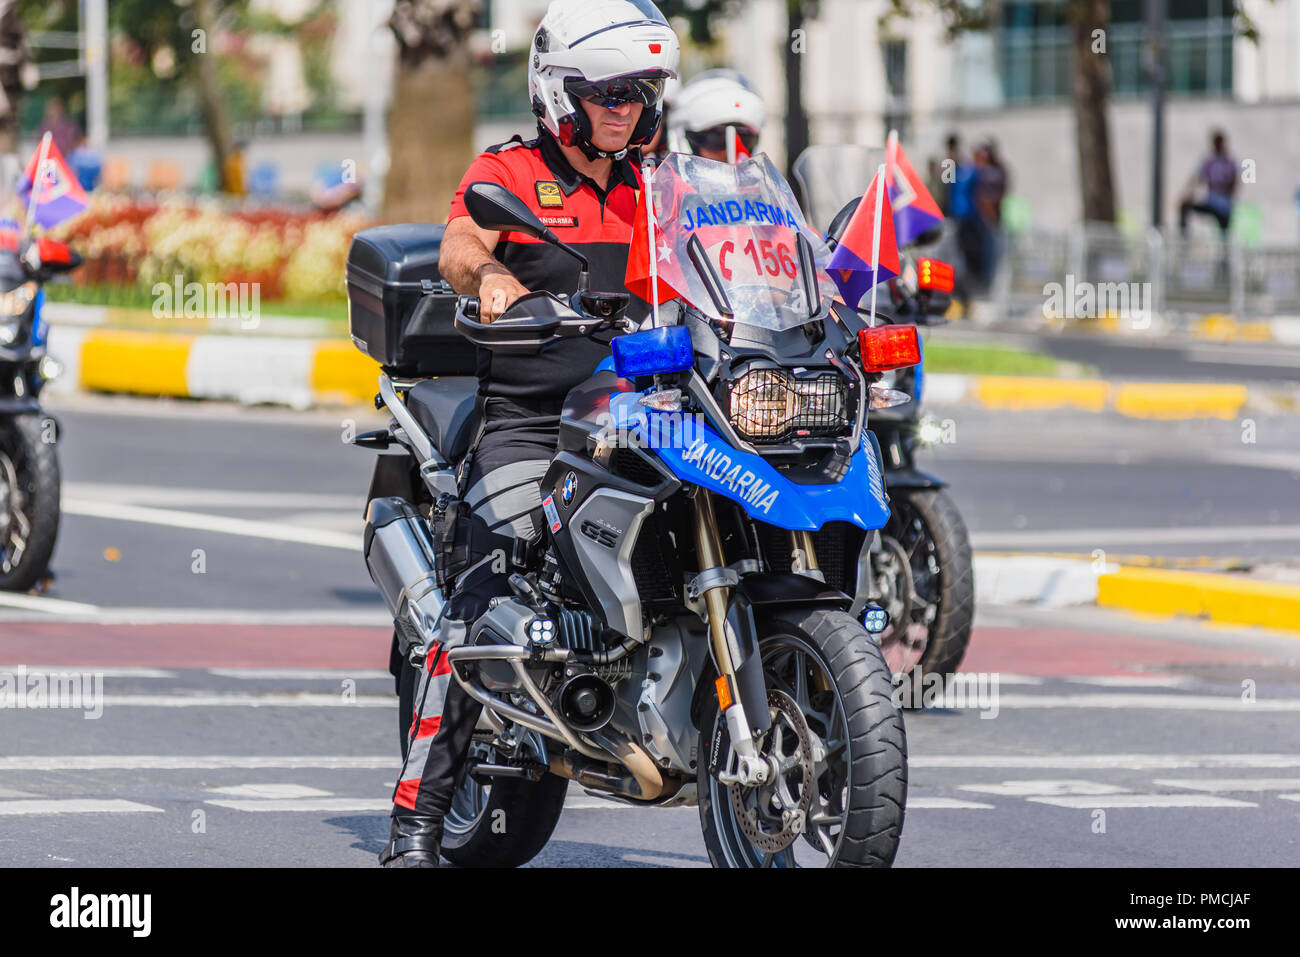 Turkish gendarmes on motorcycles parade at Turkish 30 August Victory day.Soldiers in formation in Istanbul,Turkey.30 August 2018 Stock Photo